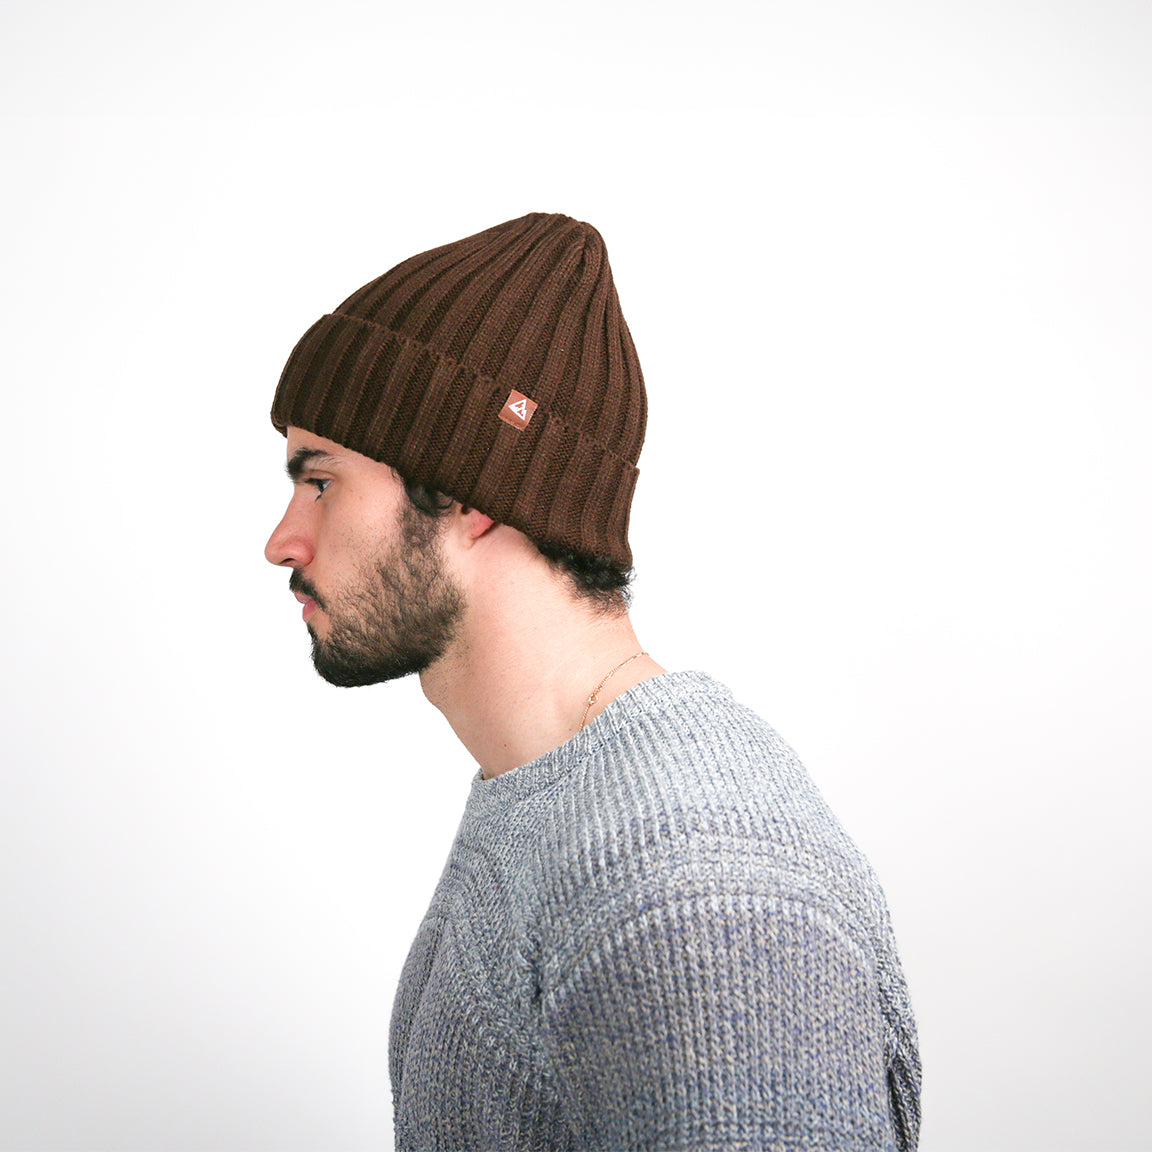 A side profile view, of the dark brown beanie is shown. The ribbed texture and the tan logo are now visible from the side. The beanie covers the ears and has a relaxed fit, with the material gathering slightly at the top for a casual look. The texture of the grey knit sweater is also apparent from this angle.